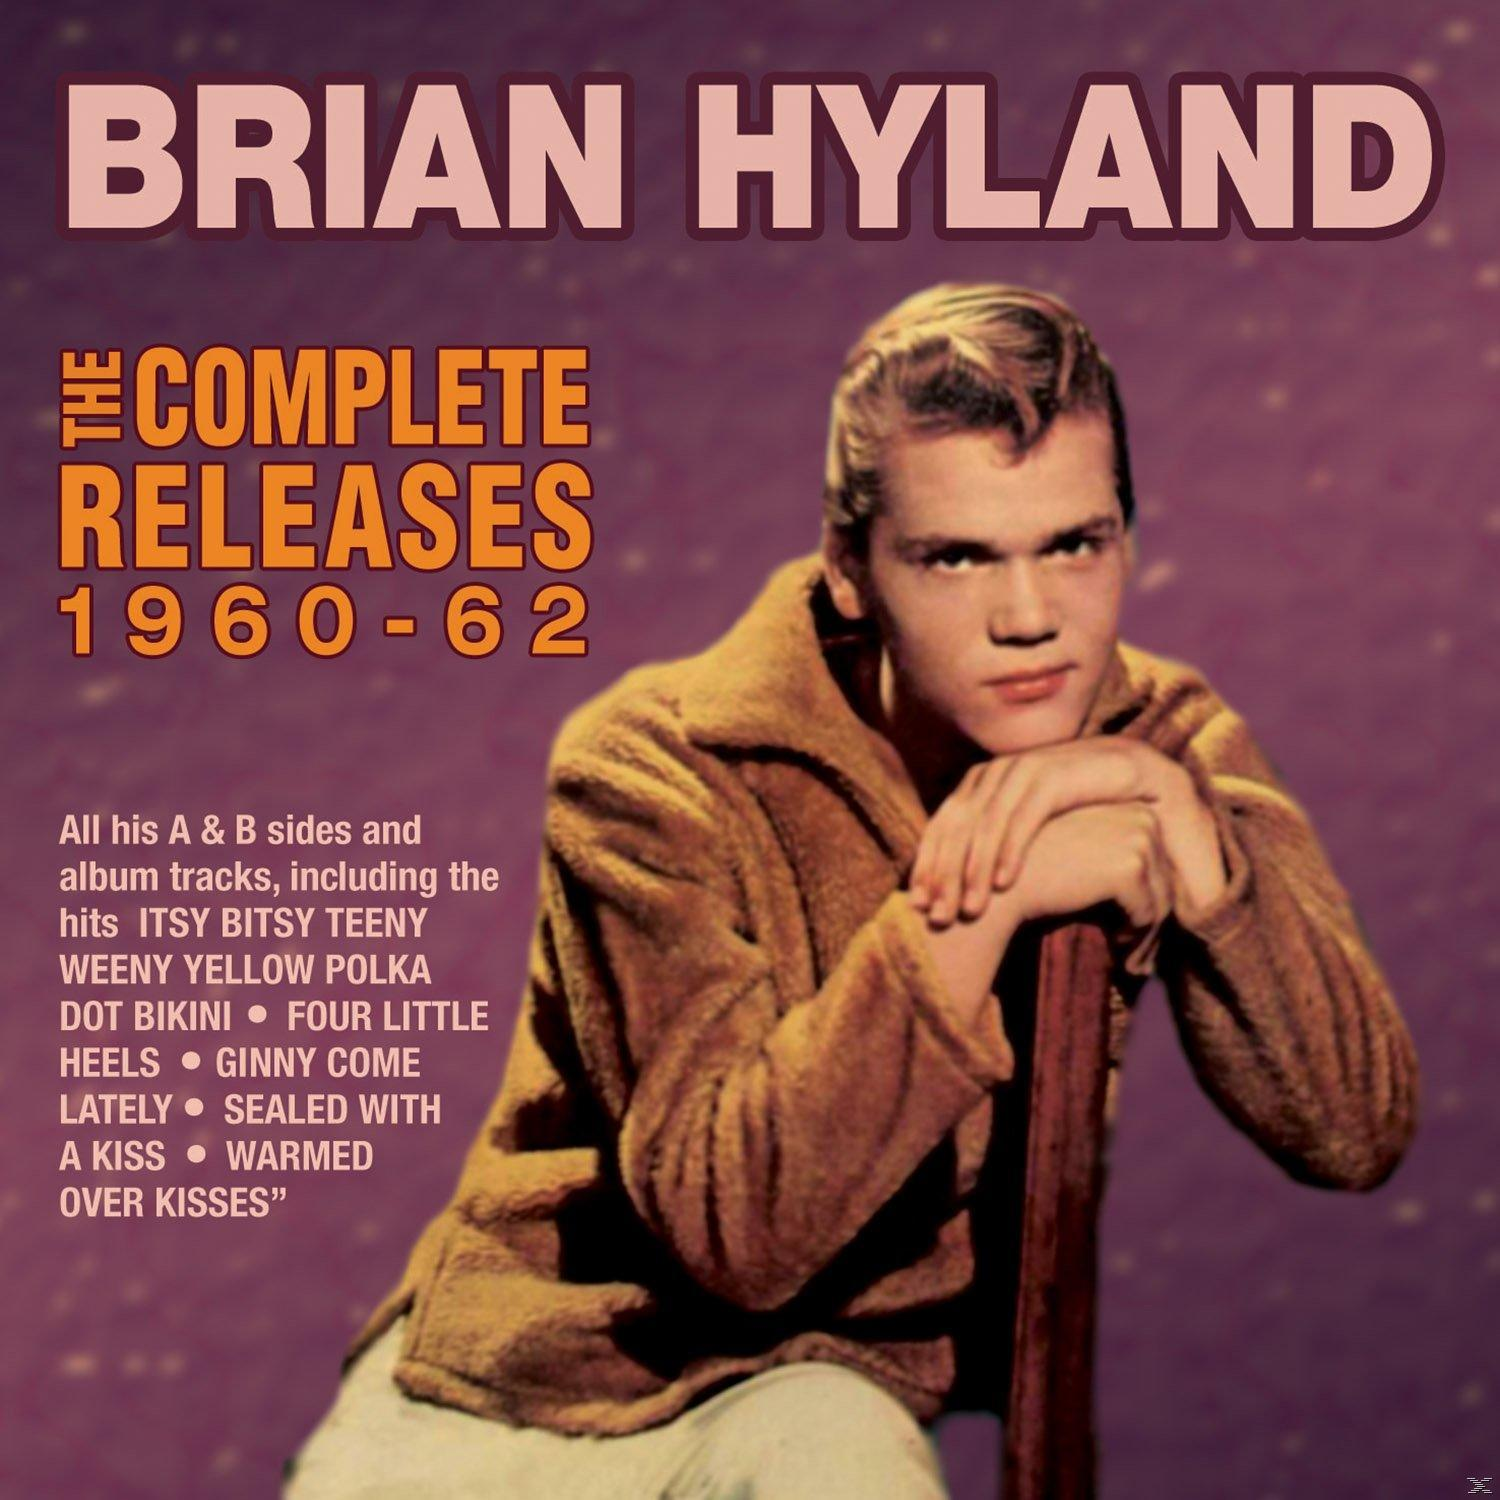 (CD) Hyland The 1960-62 Brian Complete - - Releases